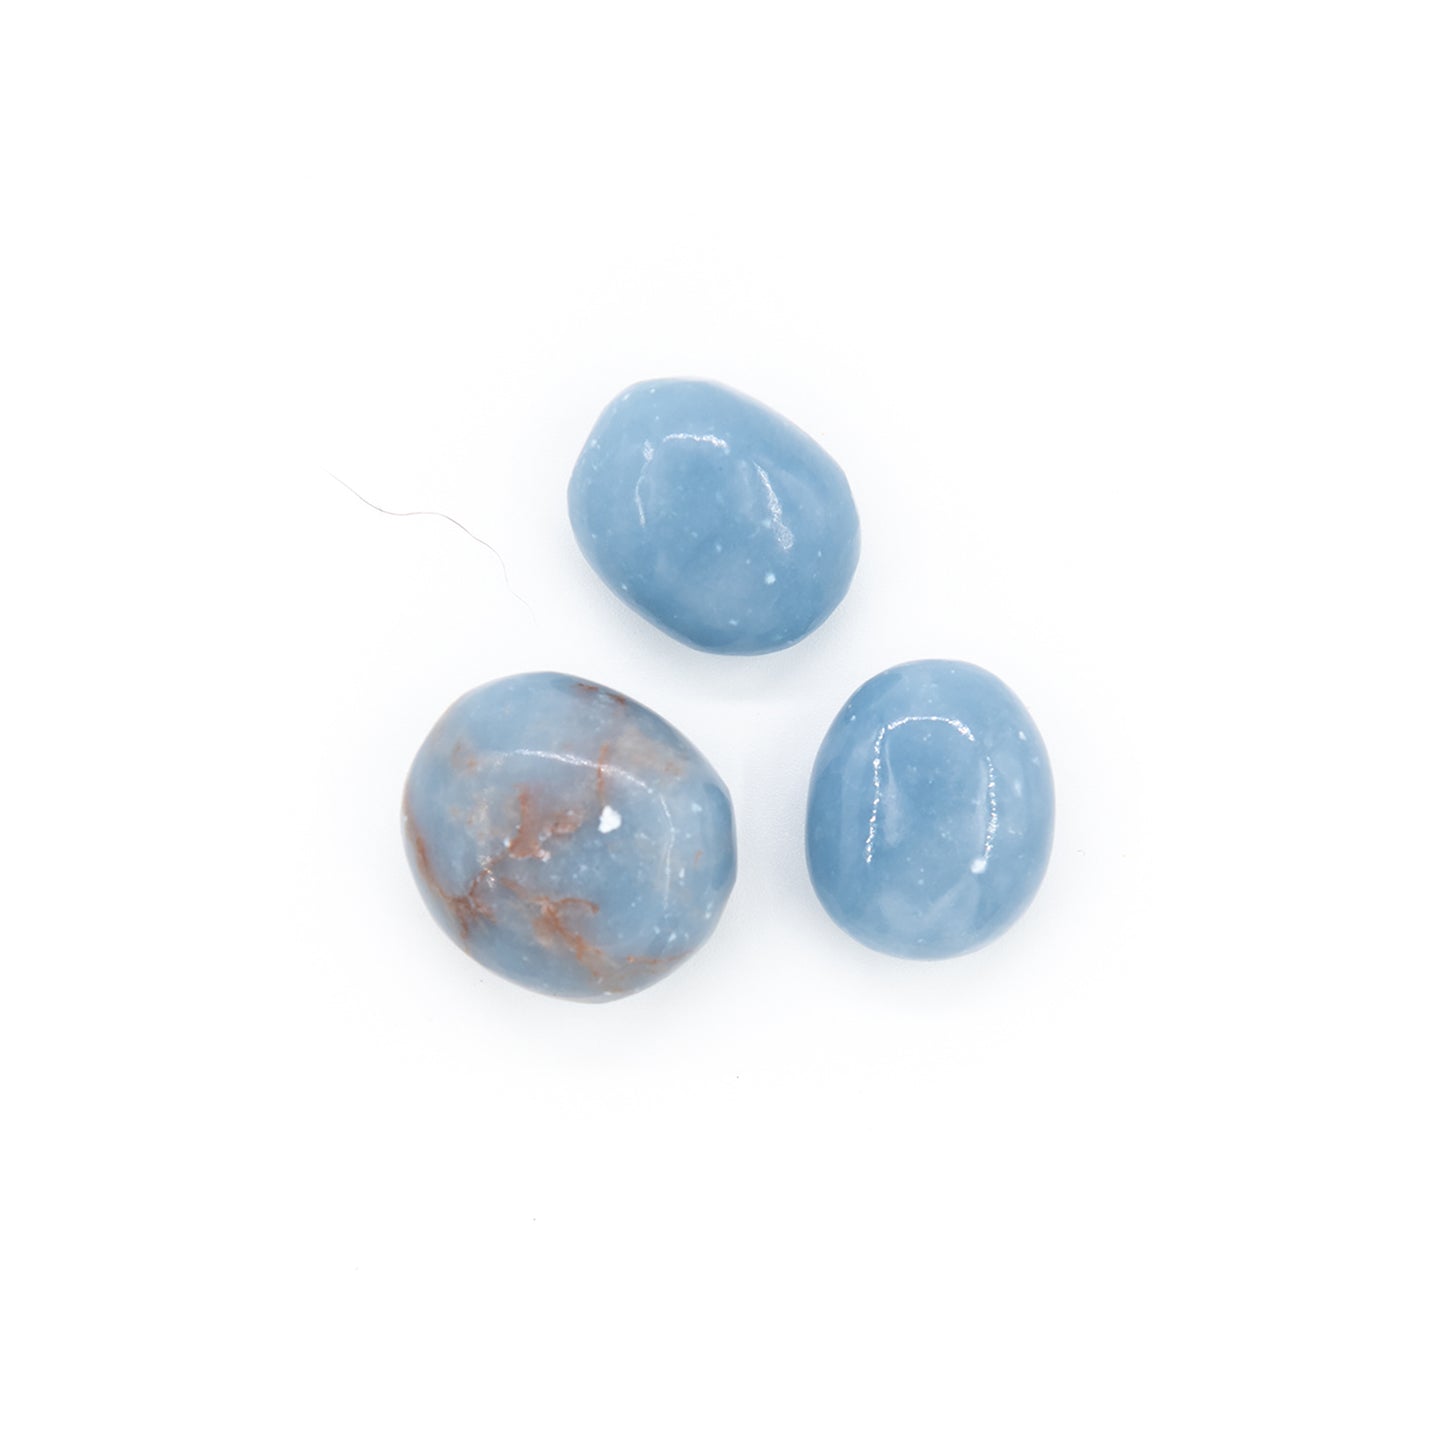 Blue opaque Angelite pebbles. Light sky blue and smoothly polished for pocket carrying.